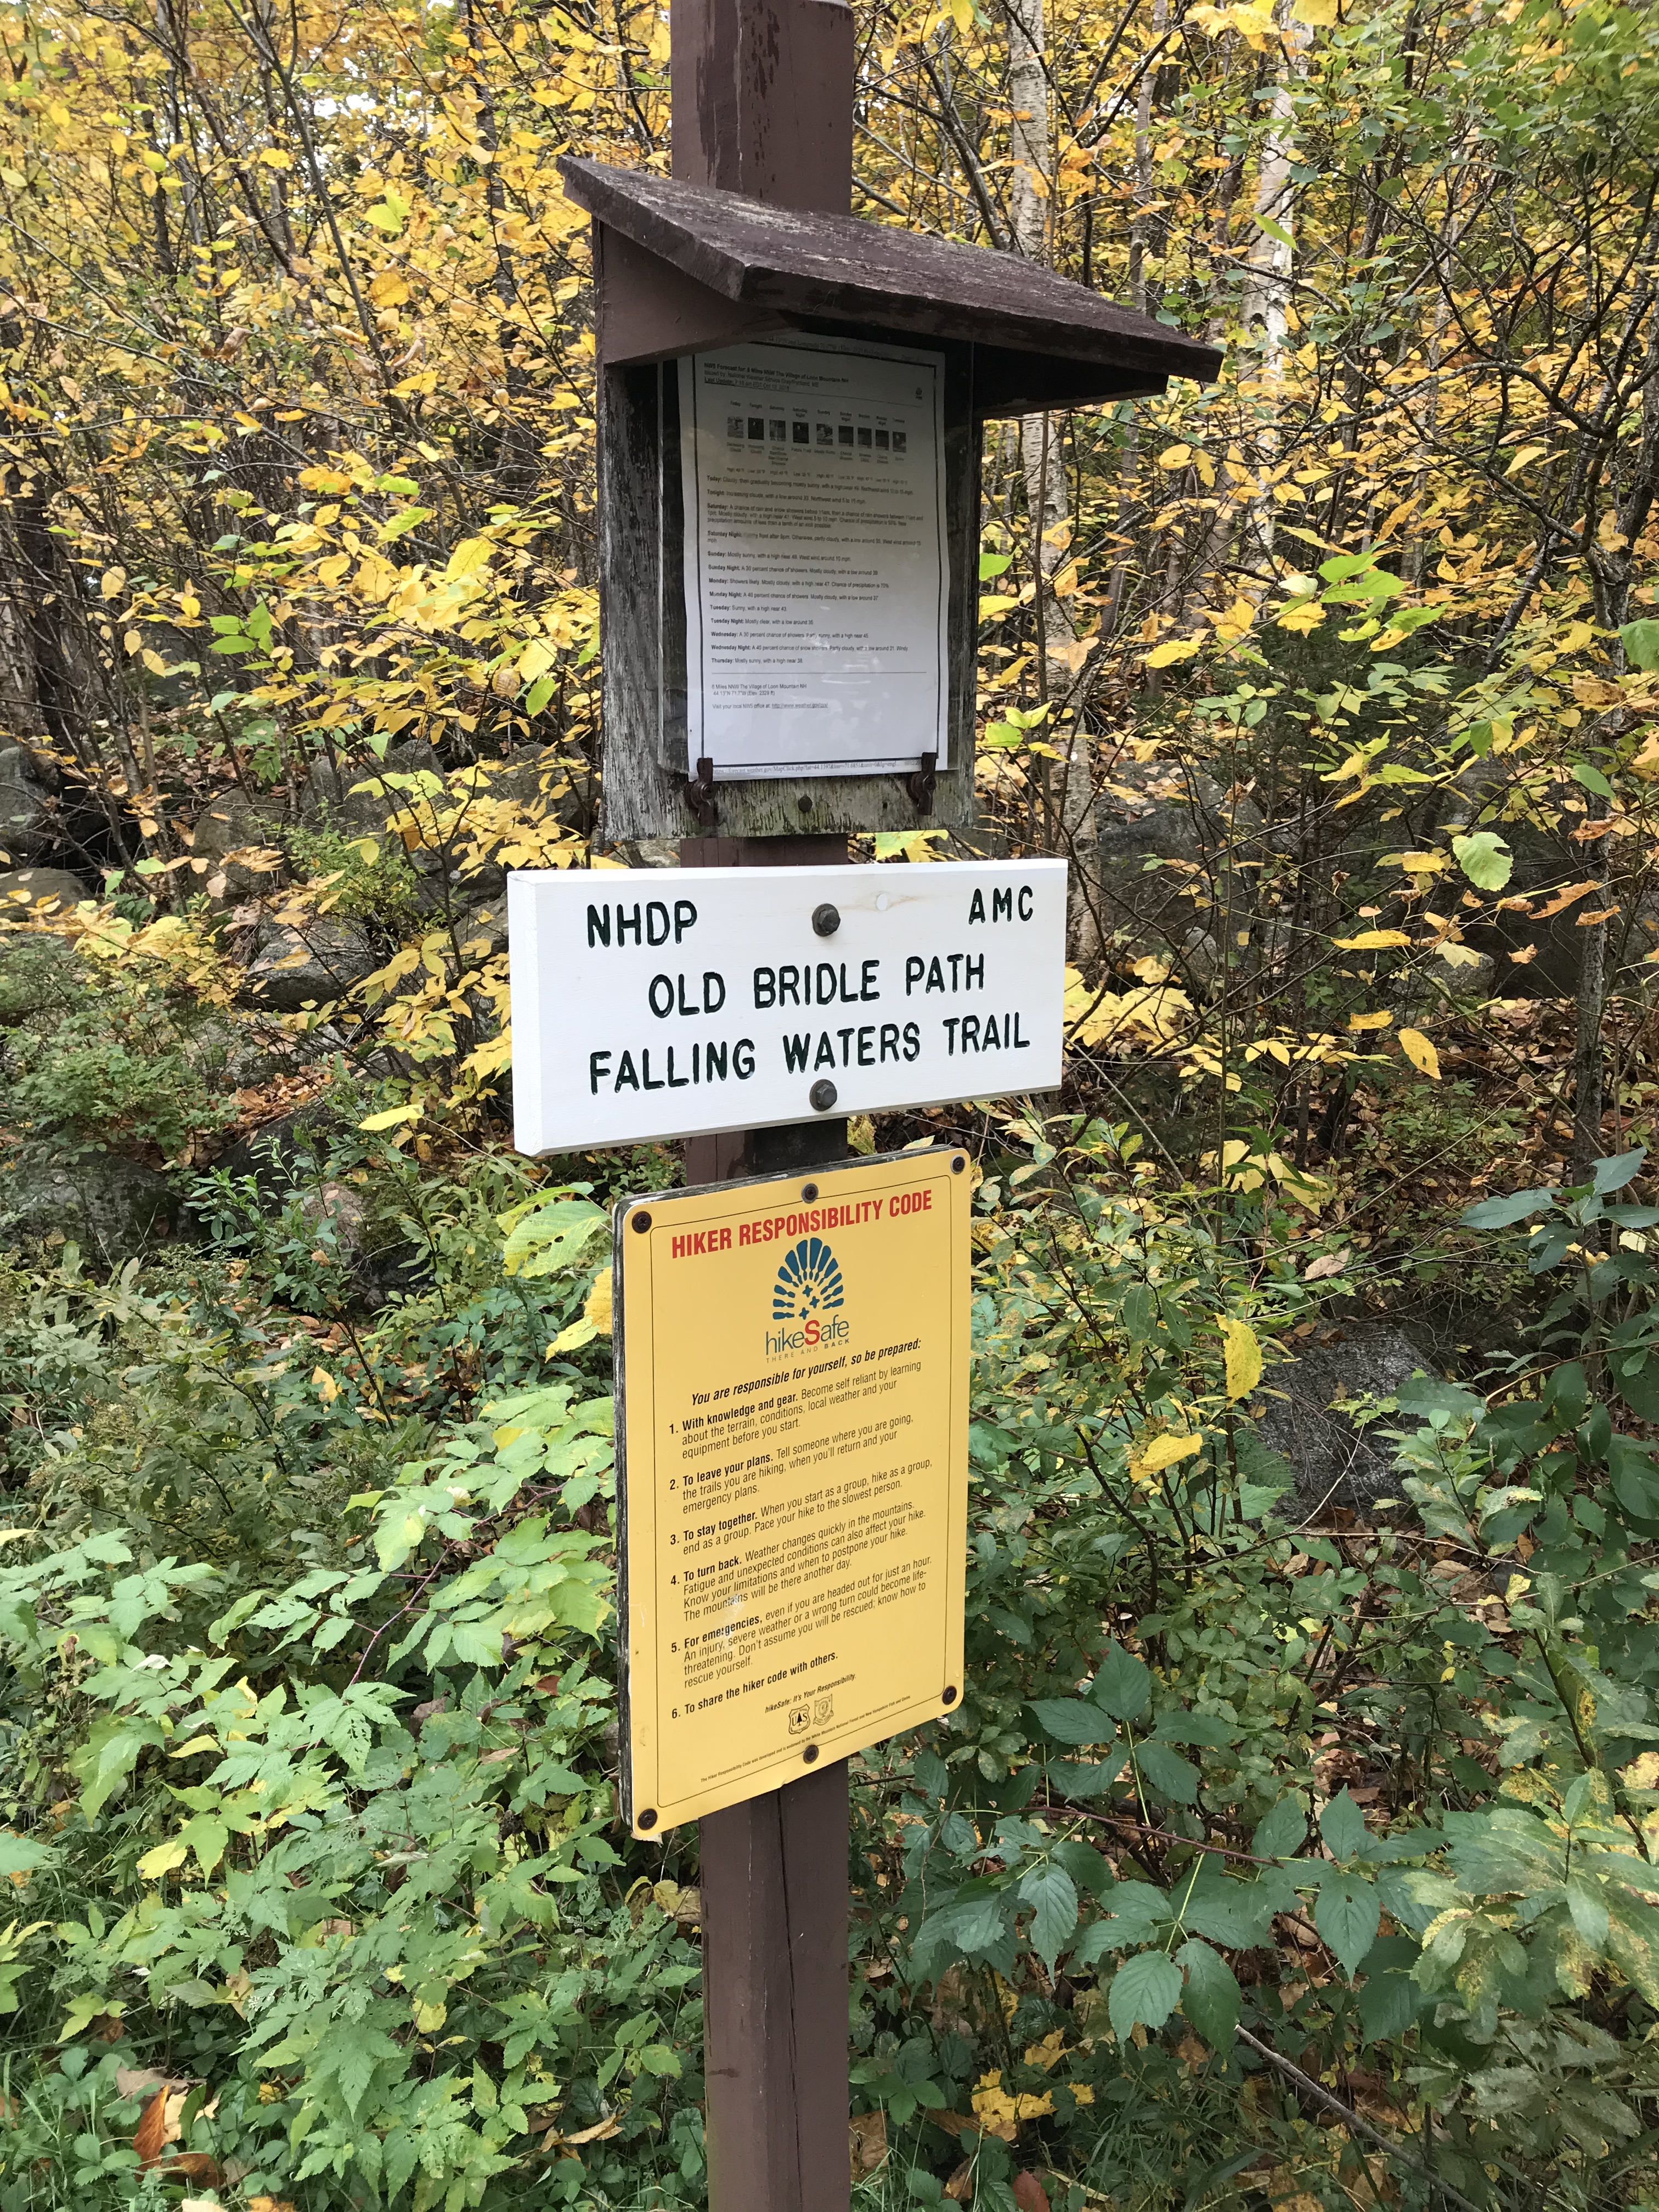 Old bridle path, falling waters trail sign